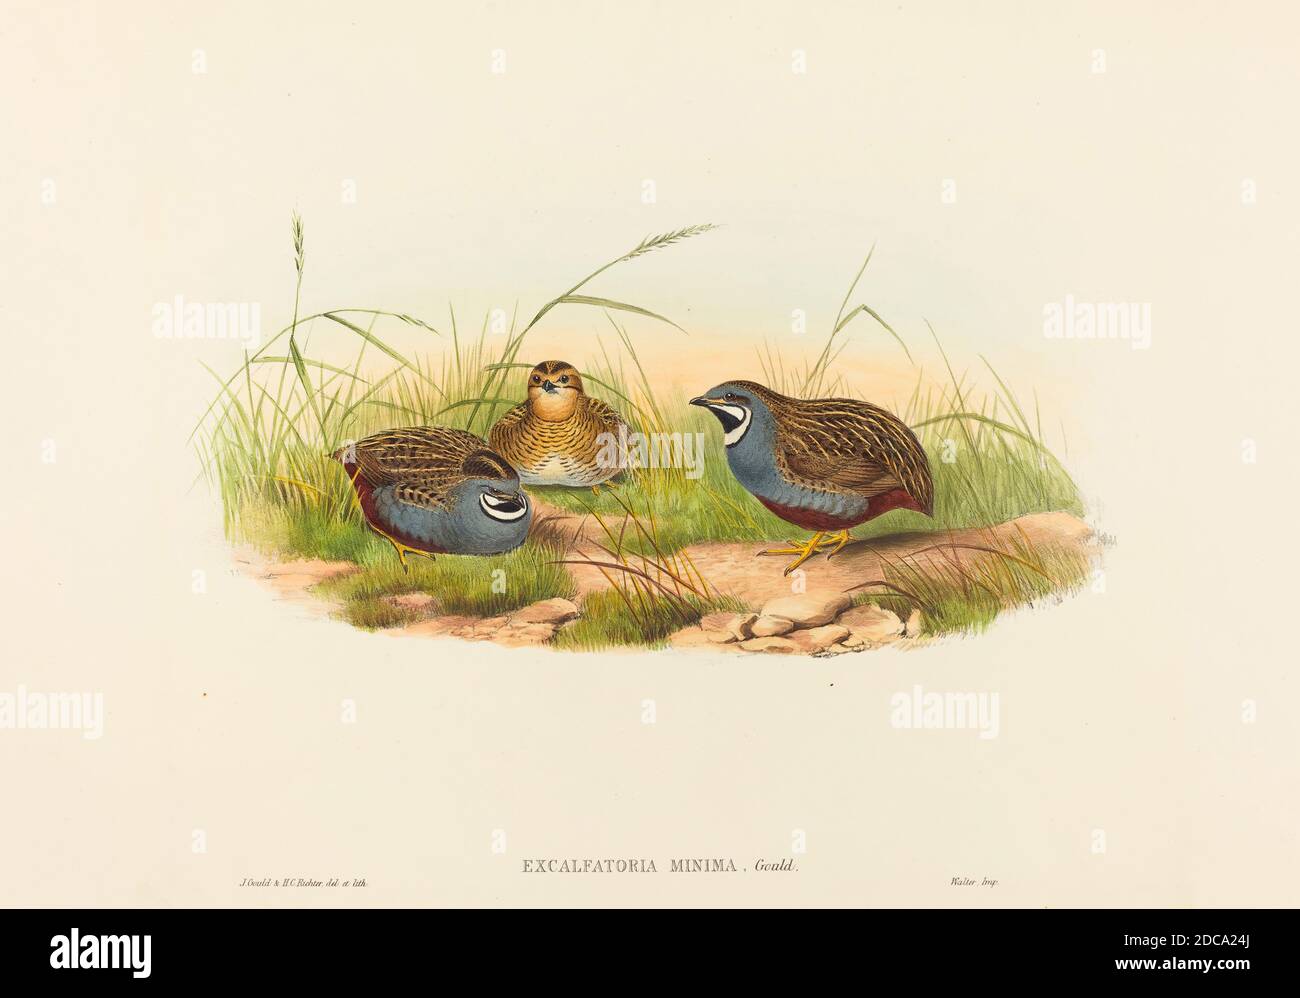 H.C. Richter, (artist), British (?), active 1841 - active c. 1881, John Gould, (artist), British, 1804 - 1881, Excalftoria minima (Blue-breasted Quail), hand-colored lithograph Stock Photo